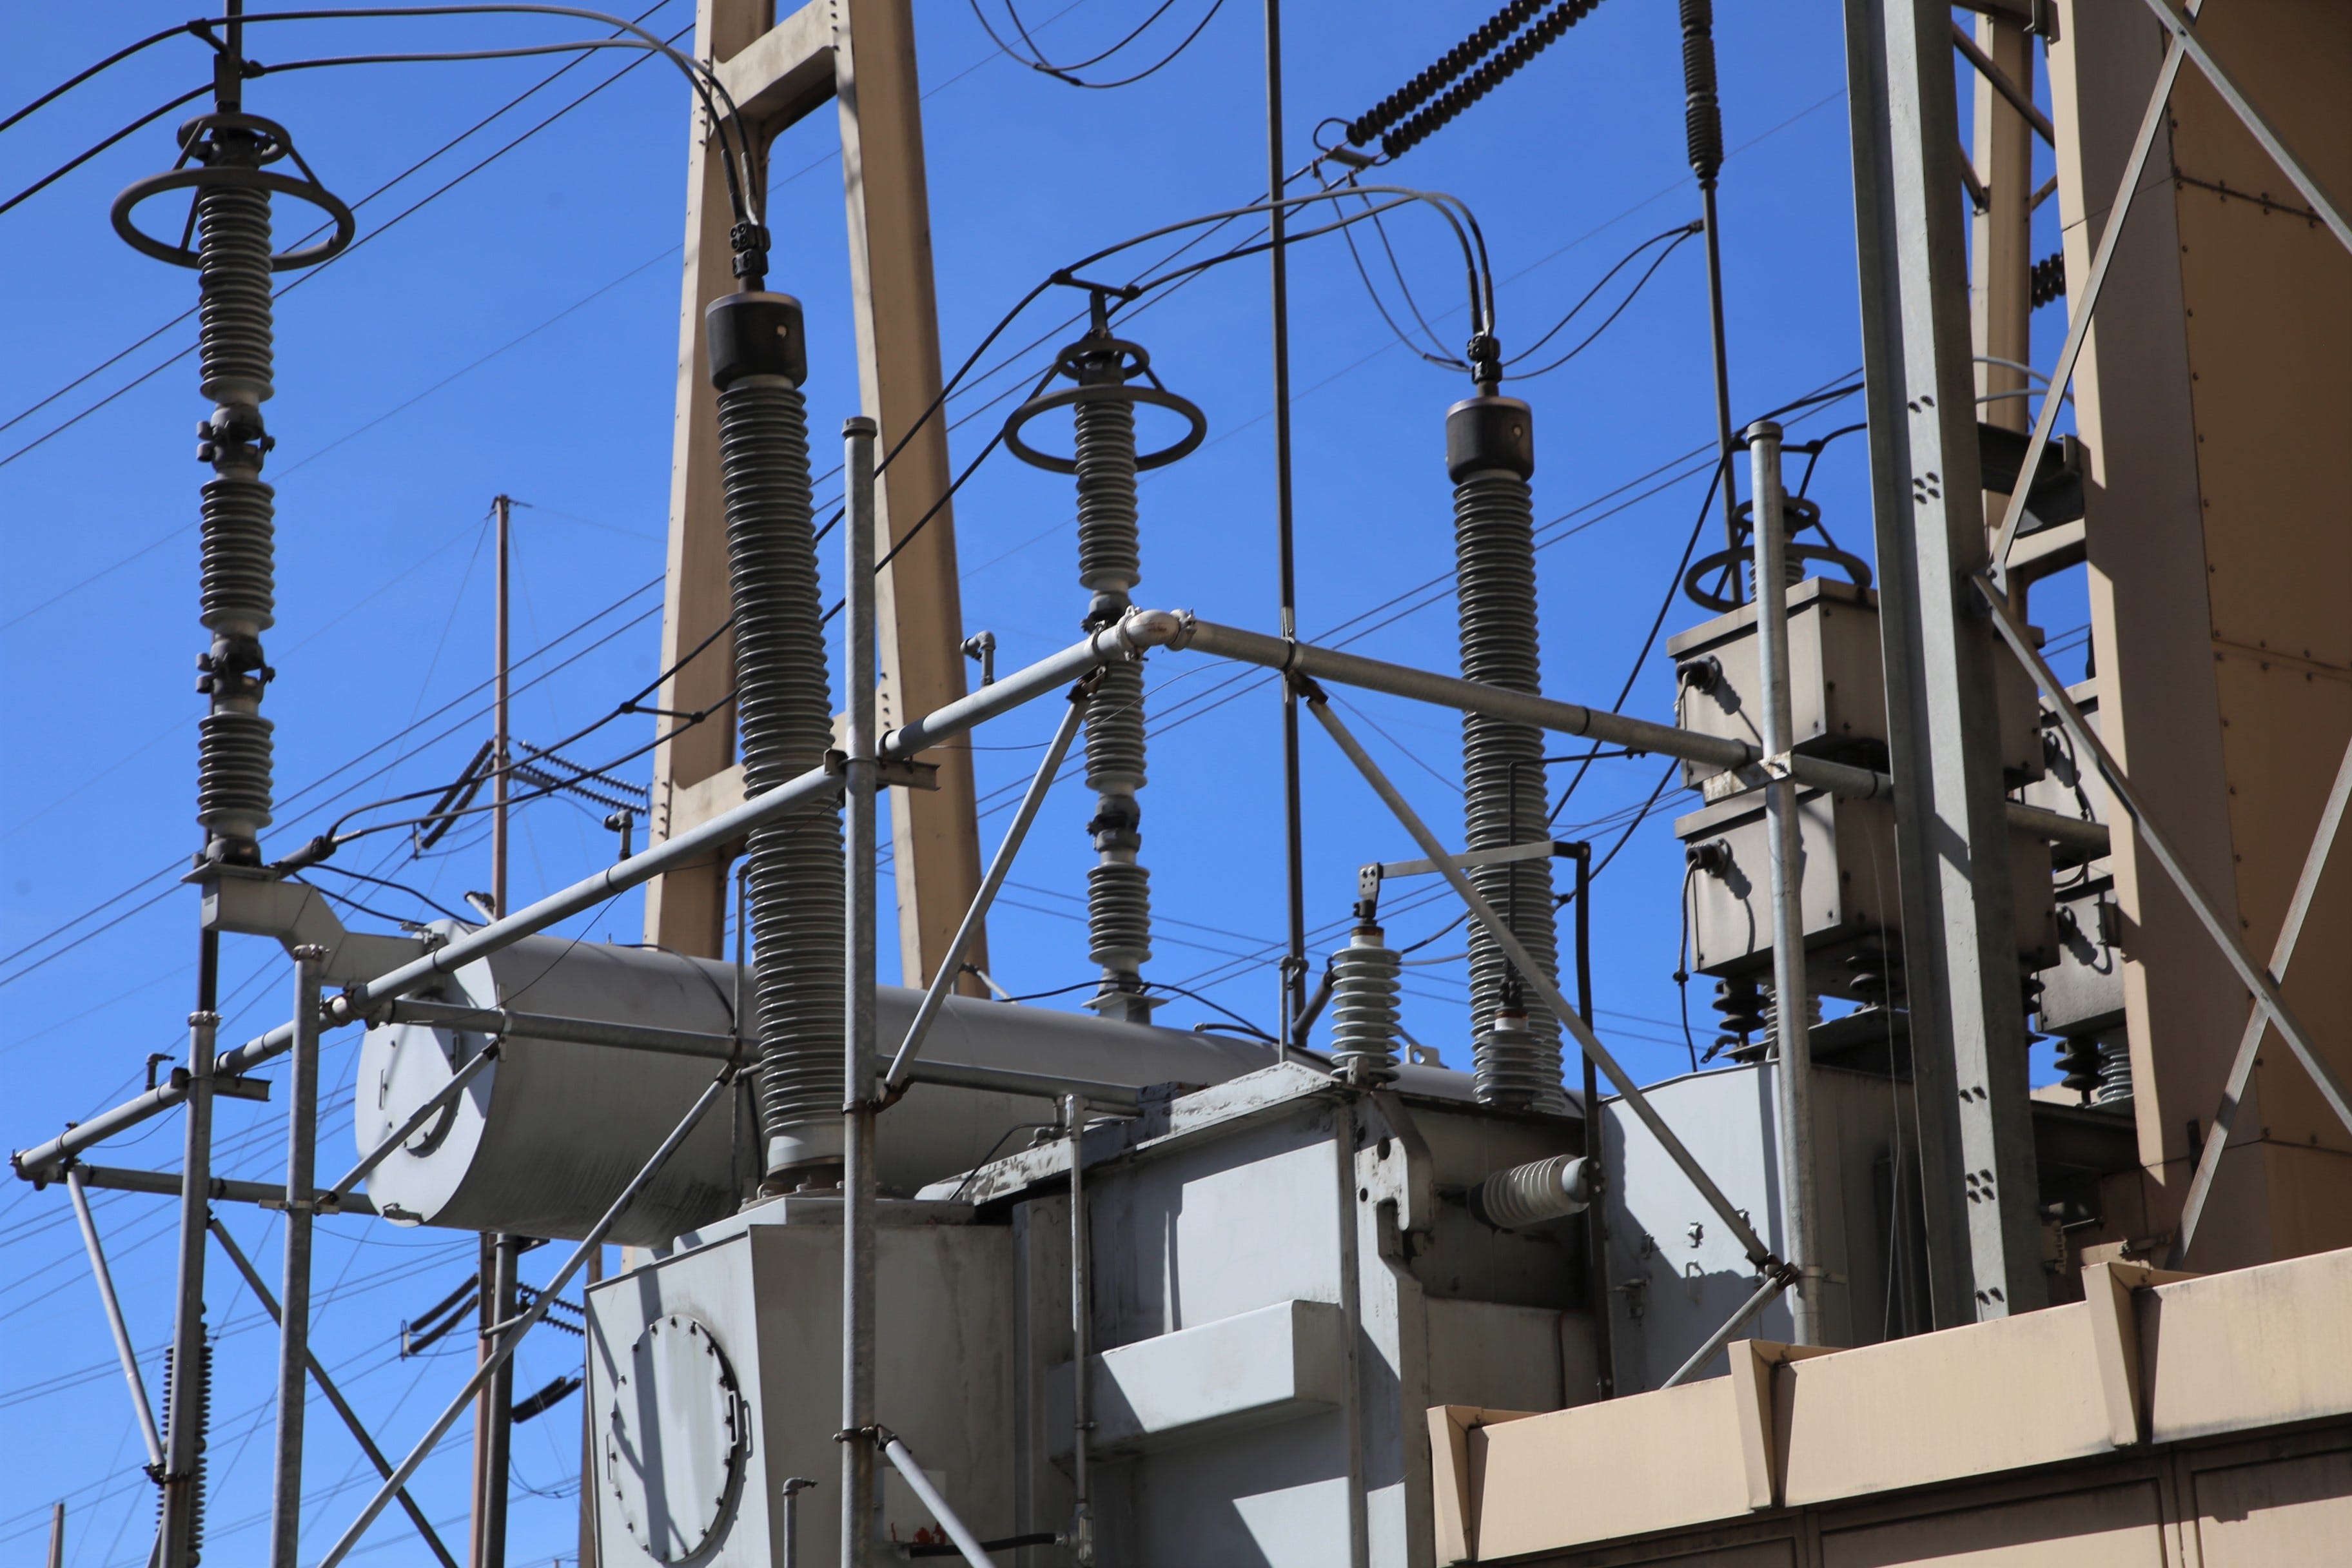 A transformer is pictured just outside the San Juan Generating Station. The transformer increases the voltage prior to transporting it away from the power plant.